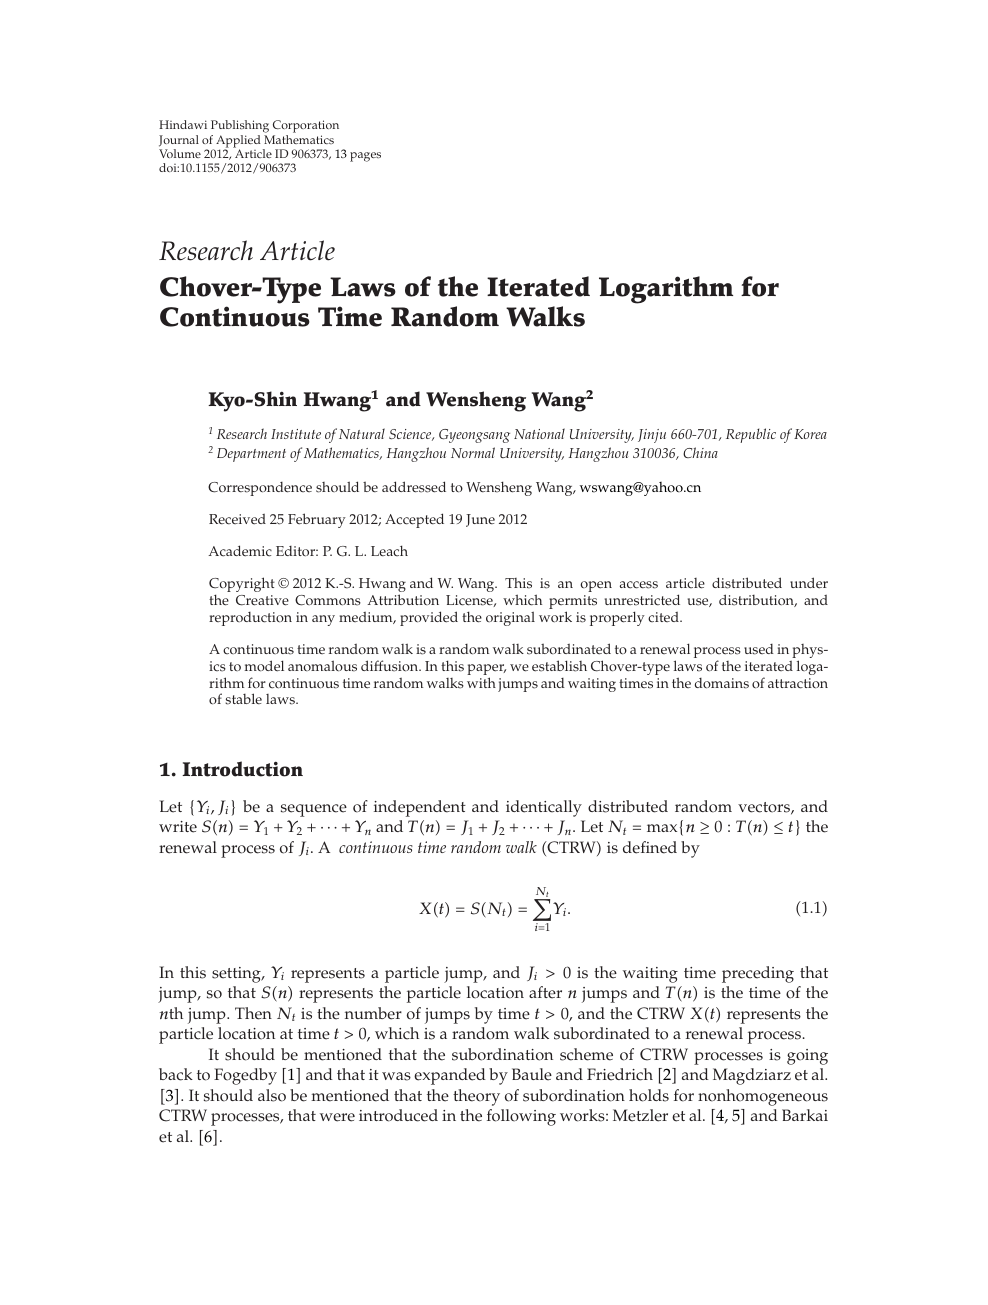 Chover Type Laws Of The Iterated Logarithm For Continuous Time Random Walks Topic Of Research Paper In Mathematics Download Scholarly Article Pdf And Read For Free On Cyberleninka Open Science Hub